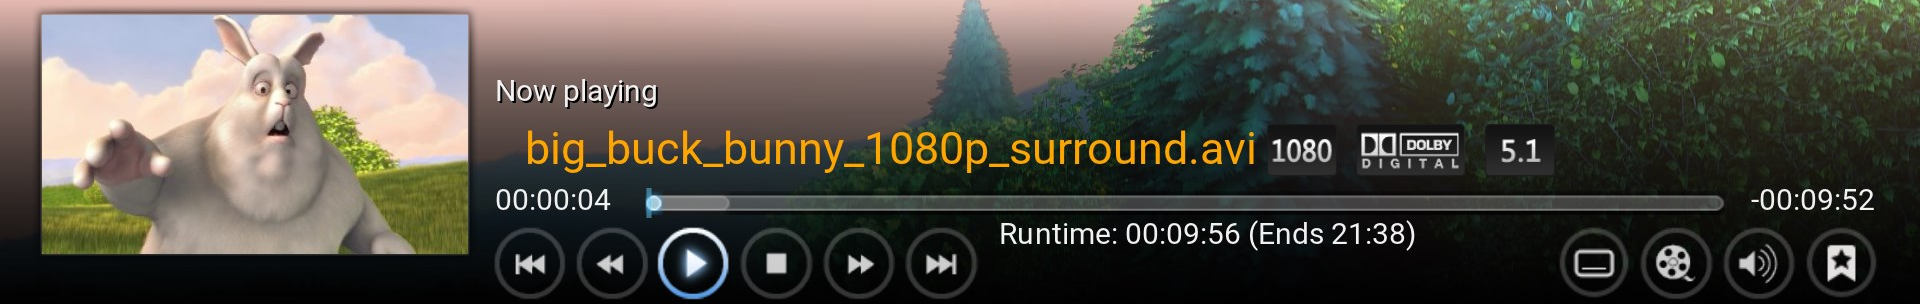 Time remaining, runtime & color/font MOD